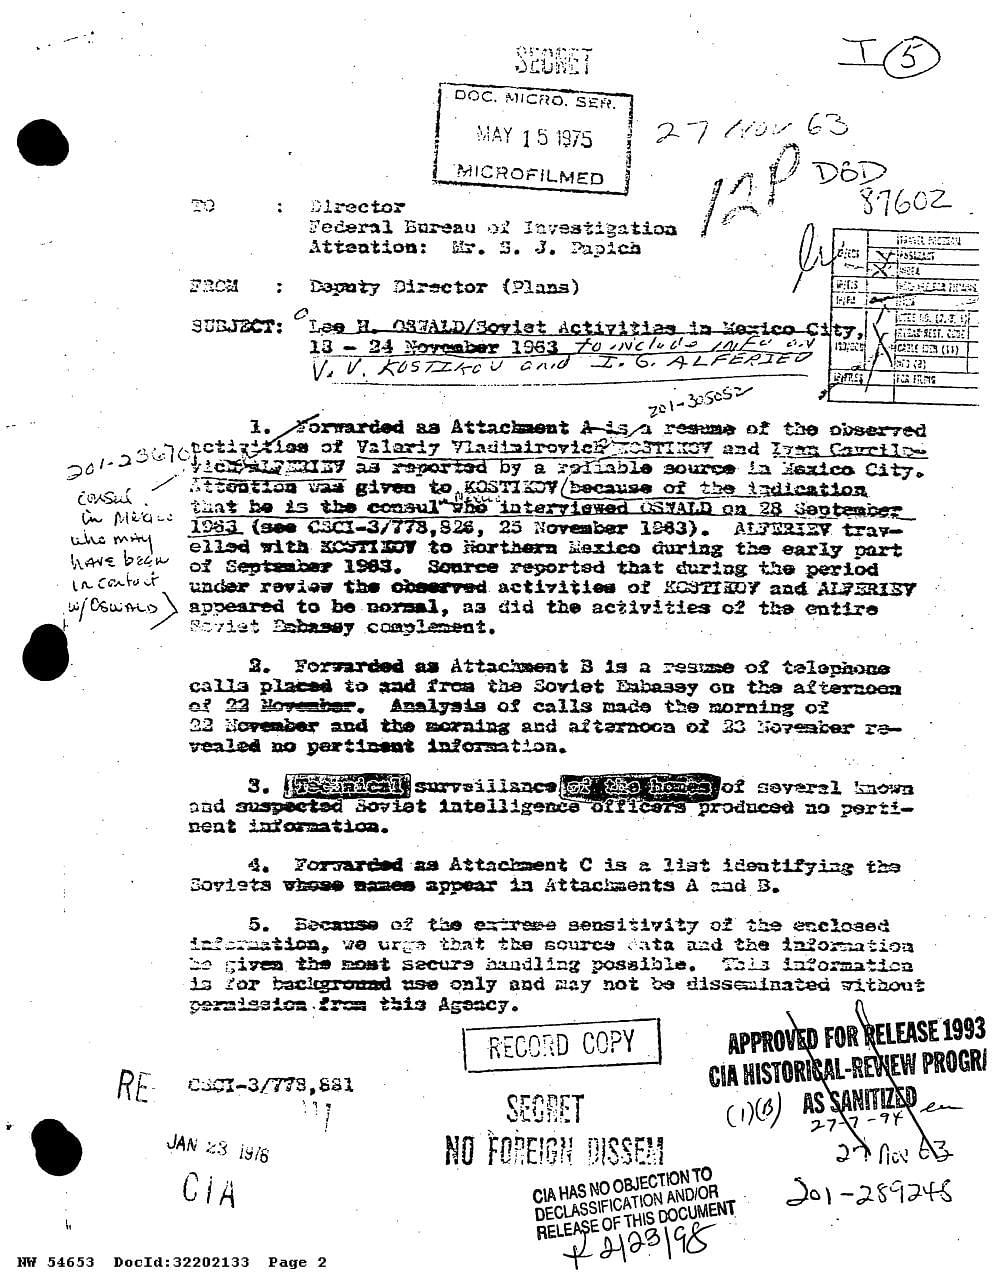 An FBI report about former president John F. Kennedy's killer Lee Harvey Oswald released by the National Archives.